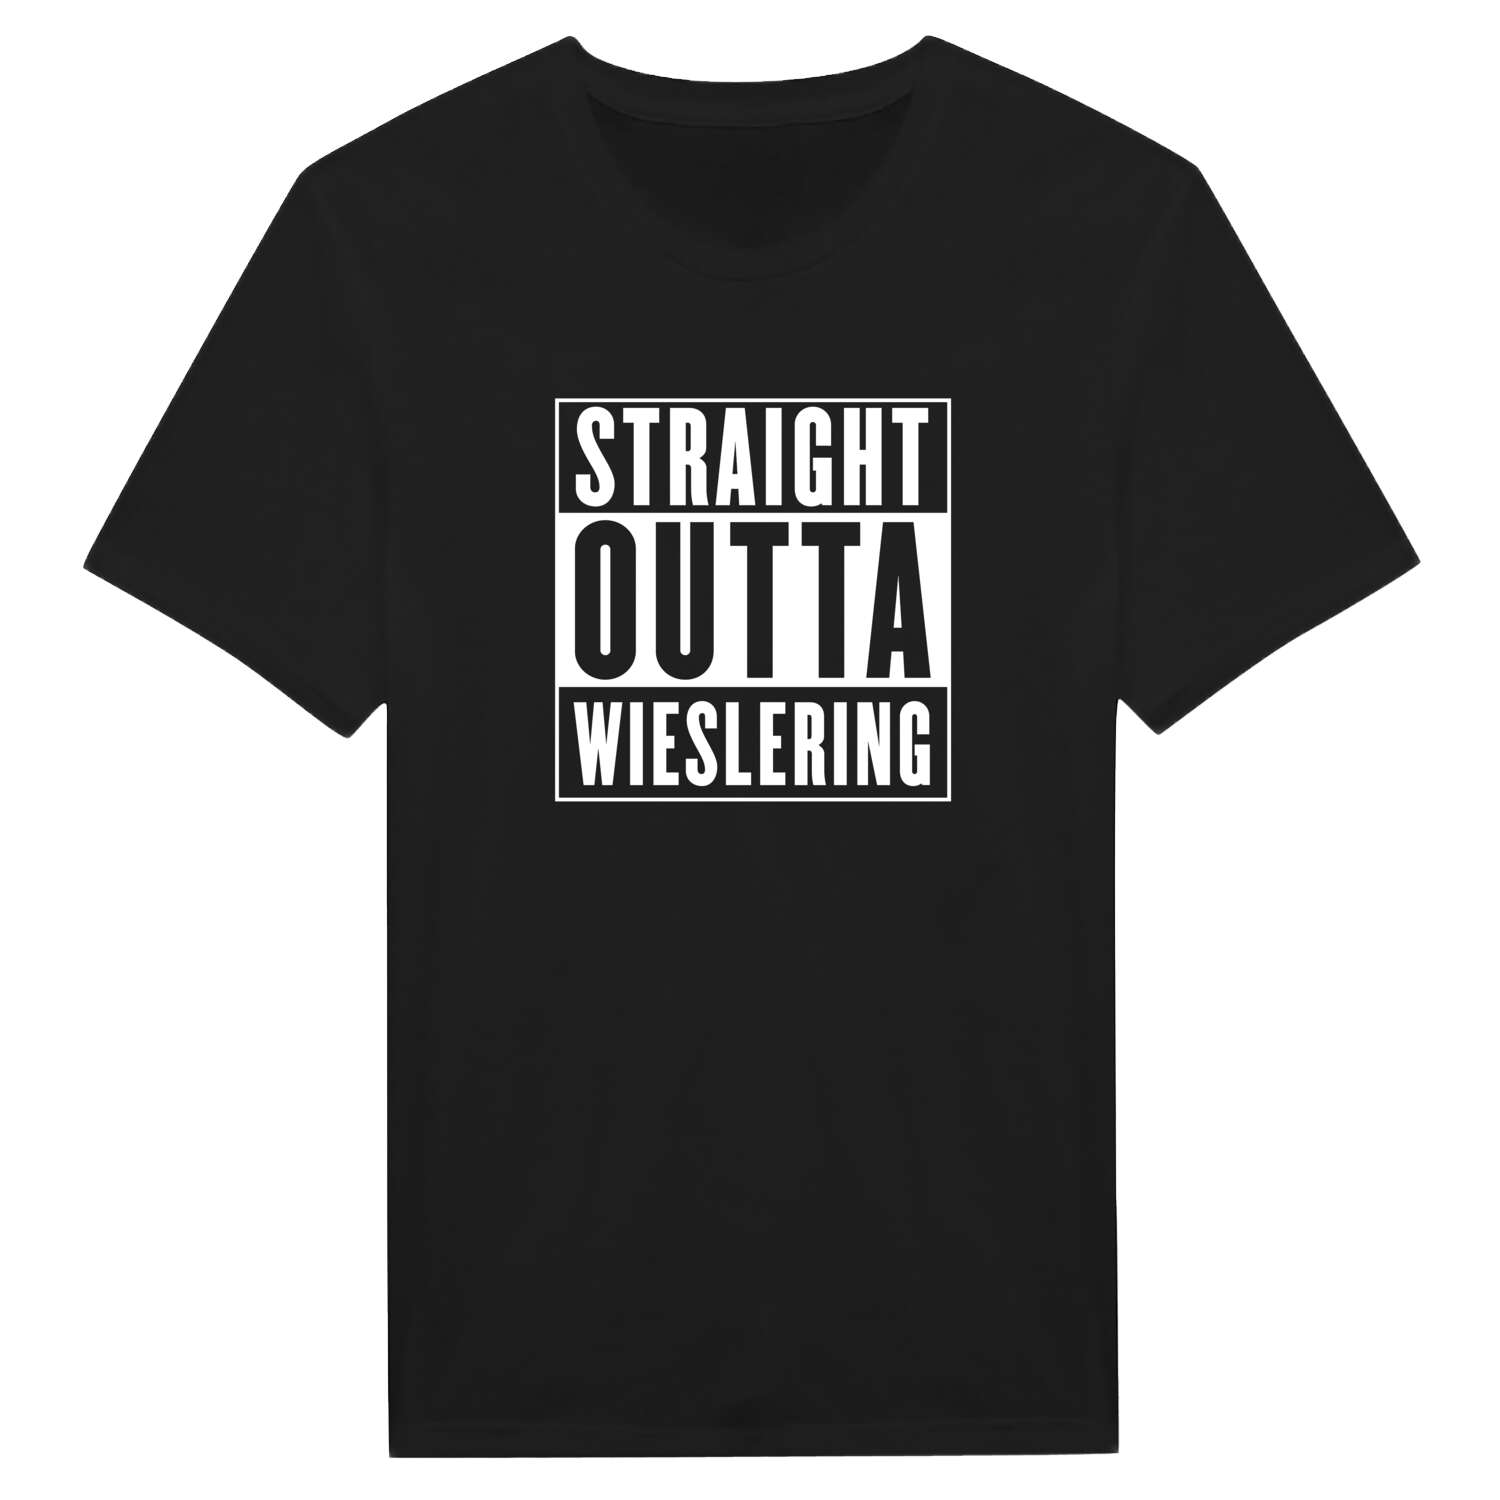 Wieslering T-Shirt »Straight Outta«